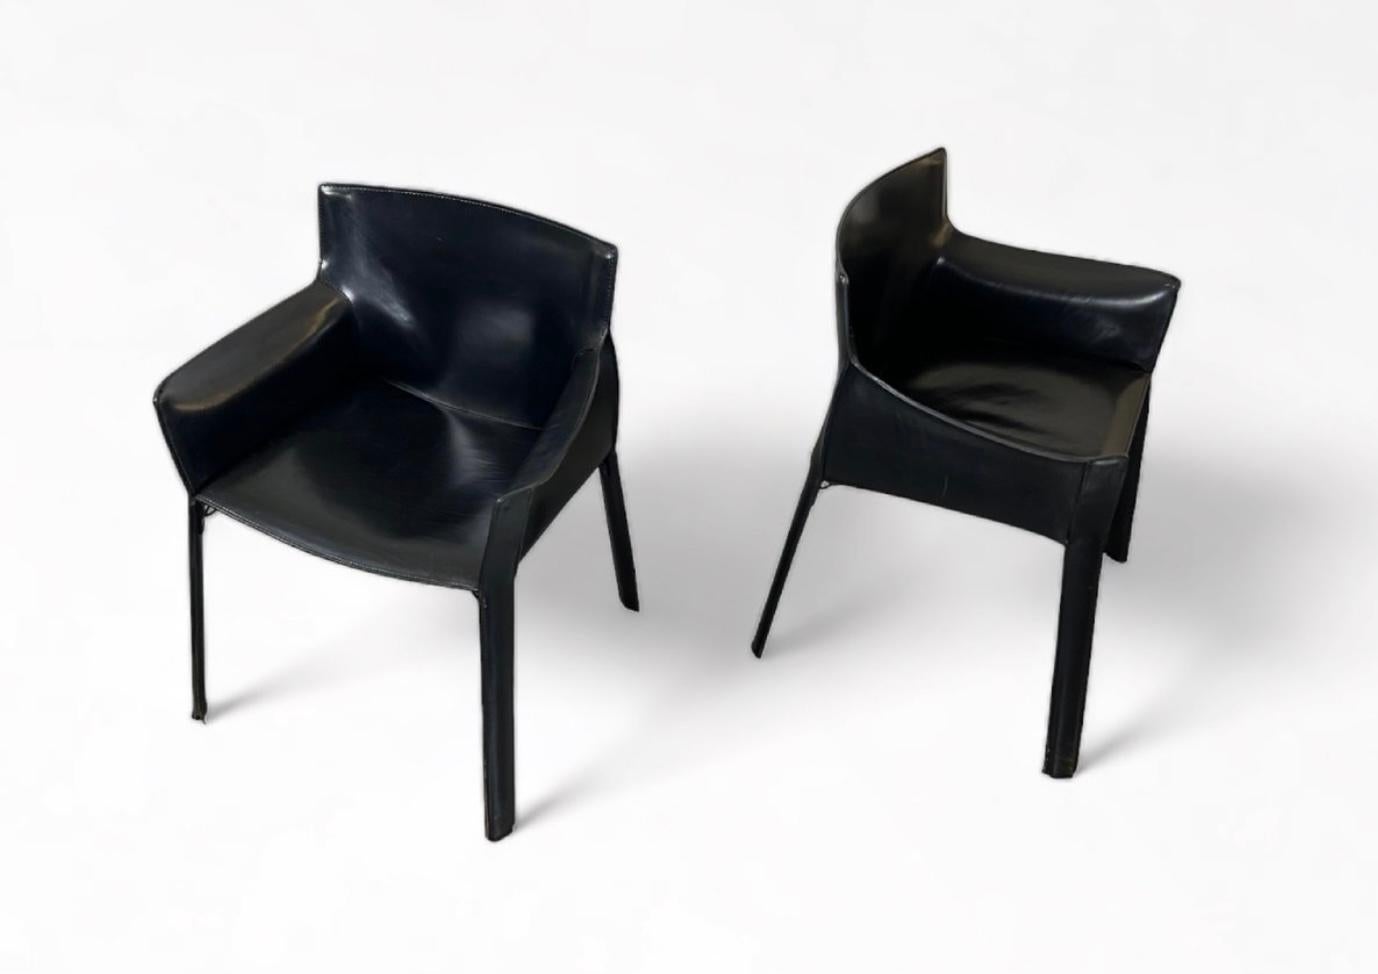 Mid Century Modern Giancarlo Vegni designed pair of P-90 arm chairs, black saddle leather over metal frame, for Fasem, Italy, 1970s. A contemporary of Mario Bellini's CAB 413 armchairs for Cassina.

These armchairs are constructed of the highest